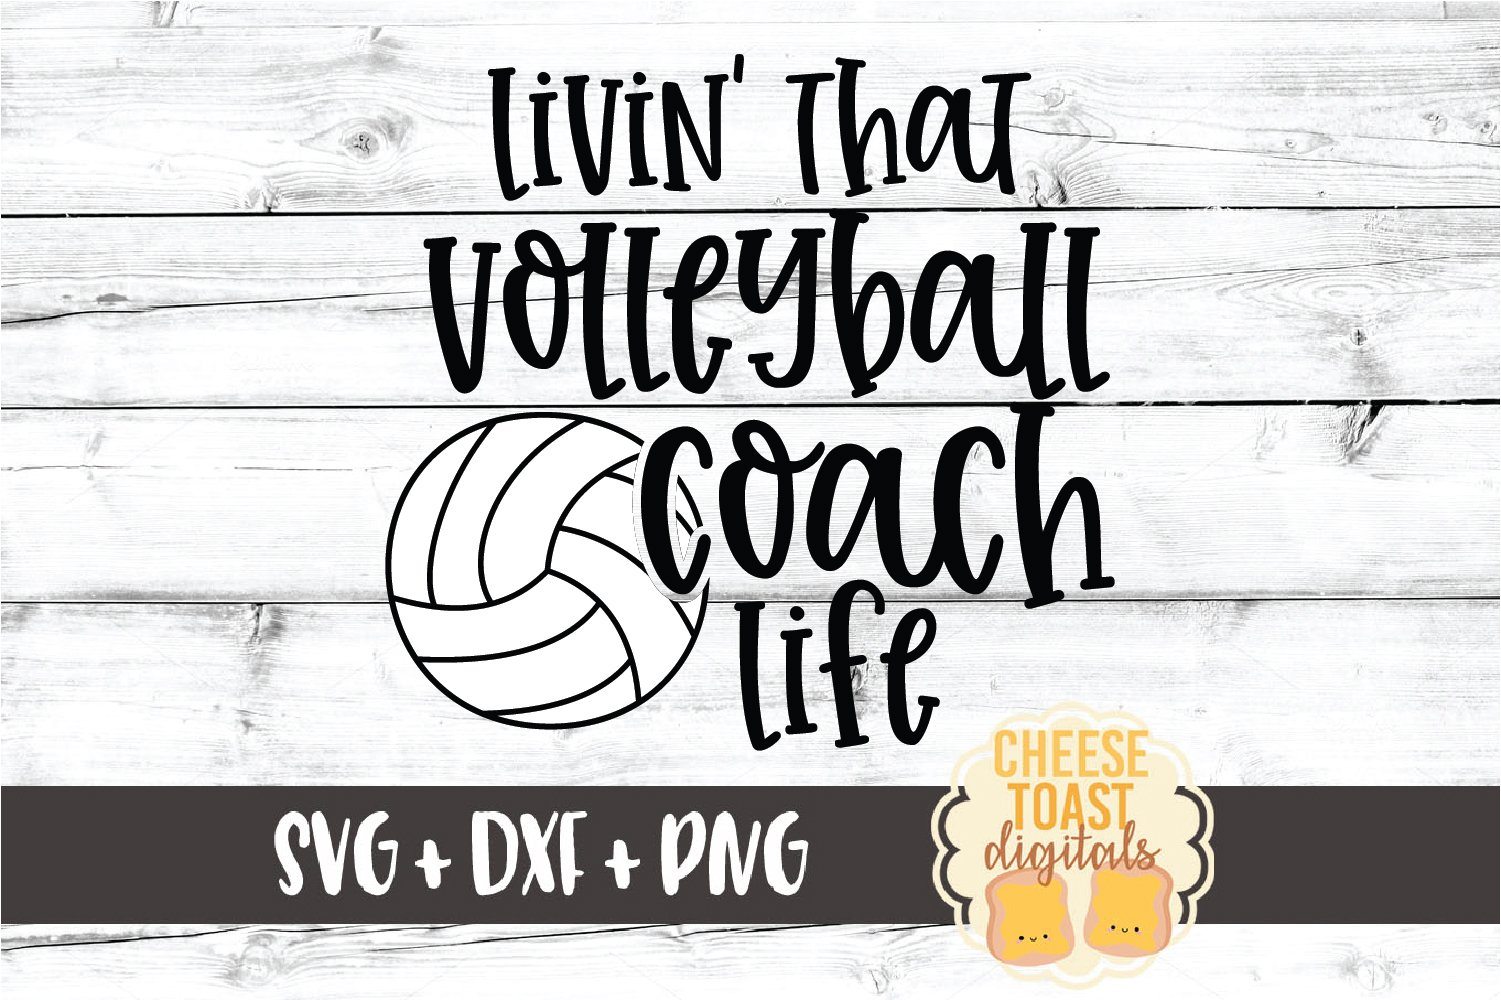 Livin That Volleyball Coach Life Volleyball Svg Png Dxf Cut Files So Fontsy